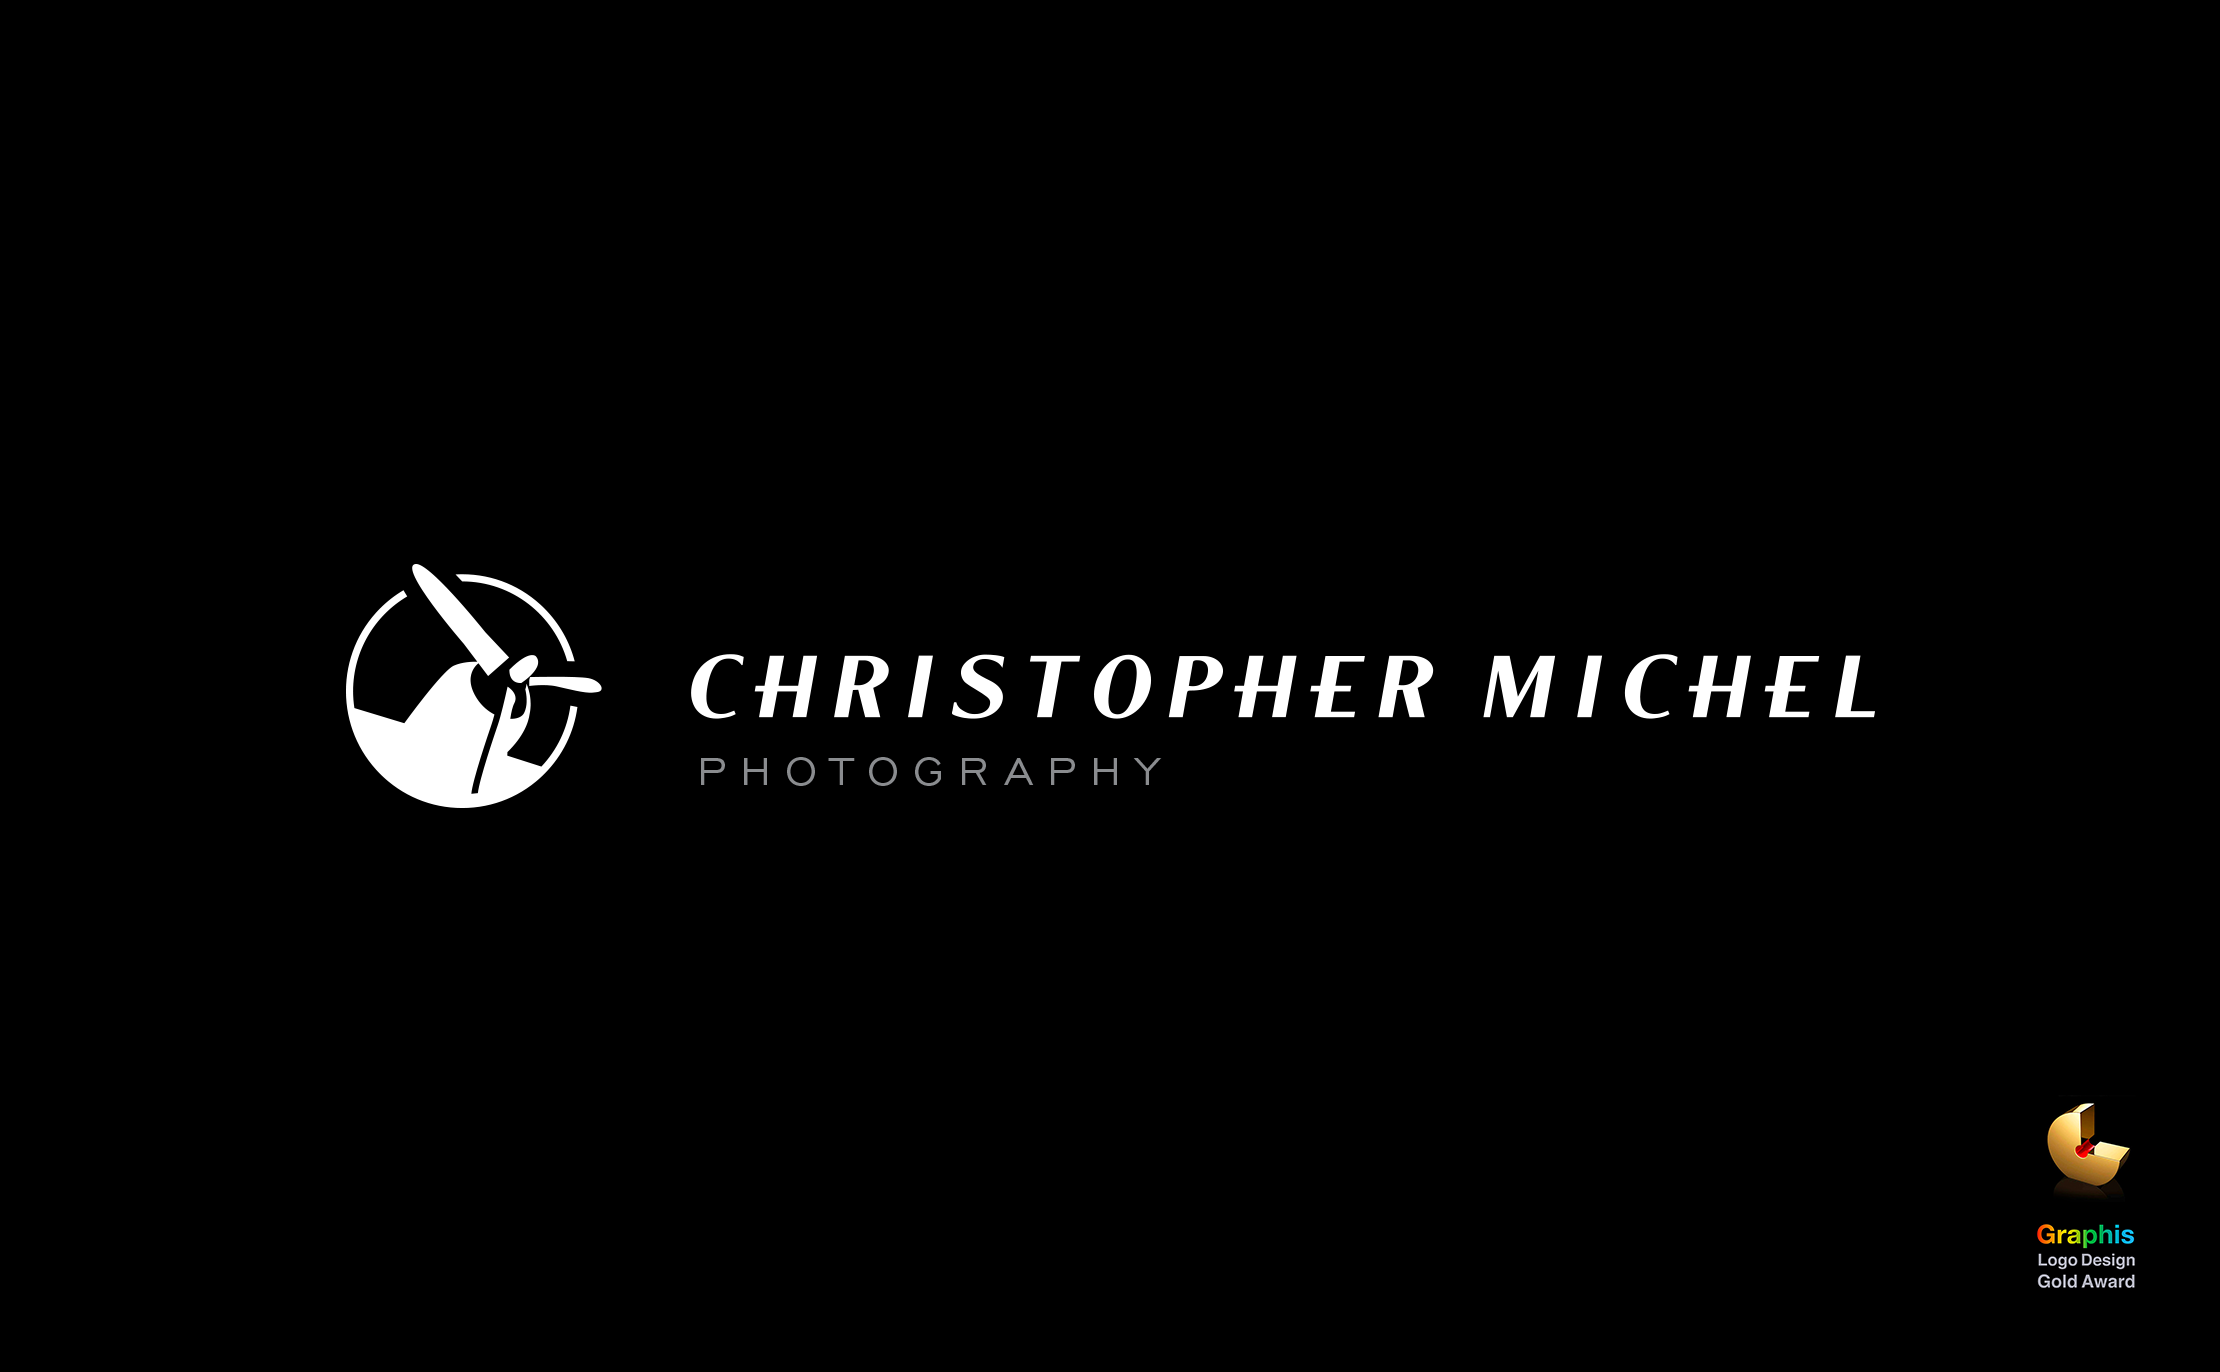 christopher_michel_photographer_logo_graphis.png